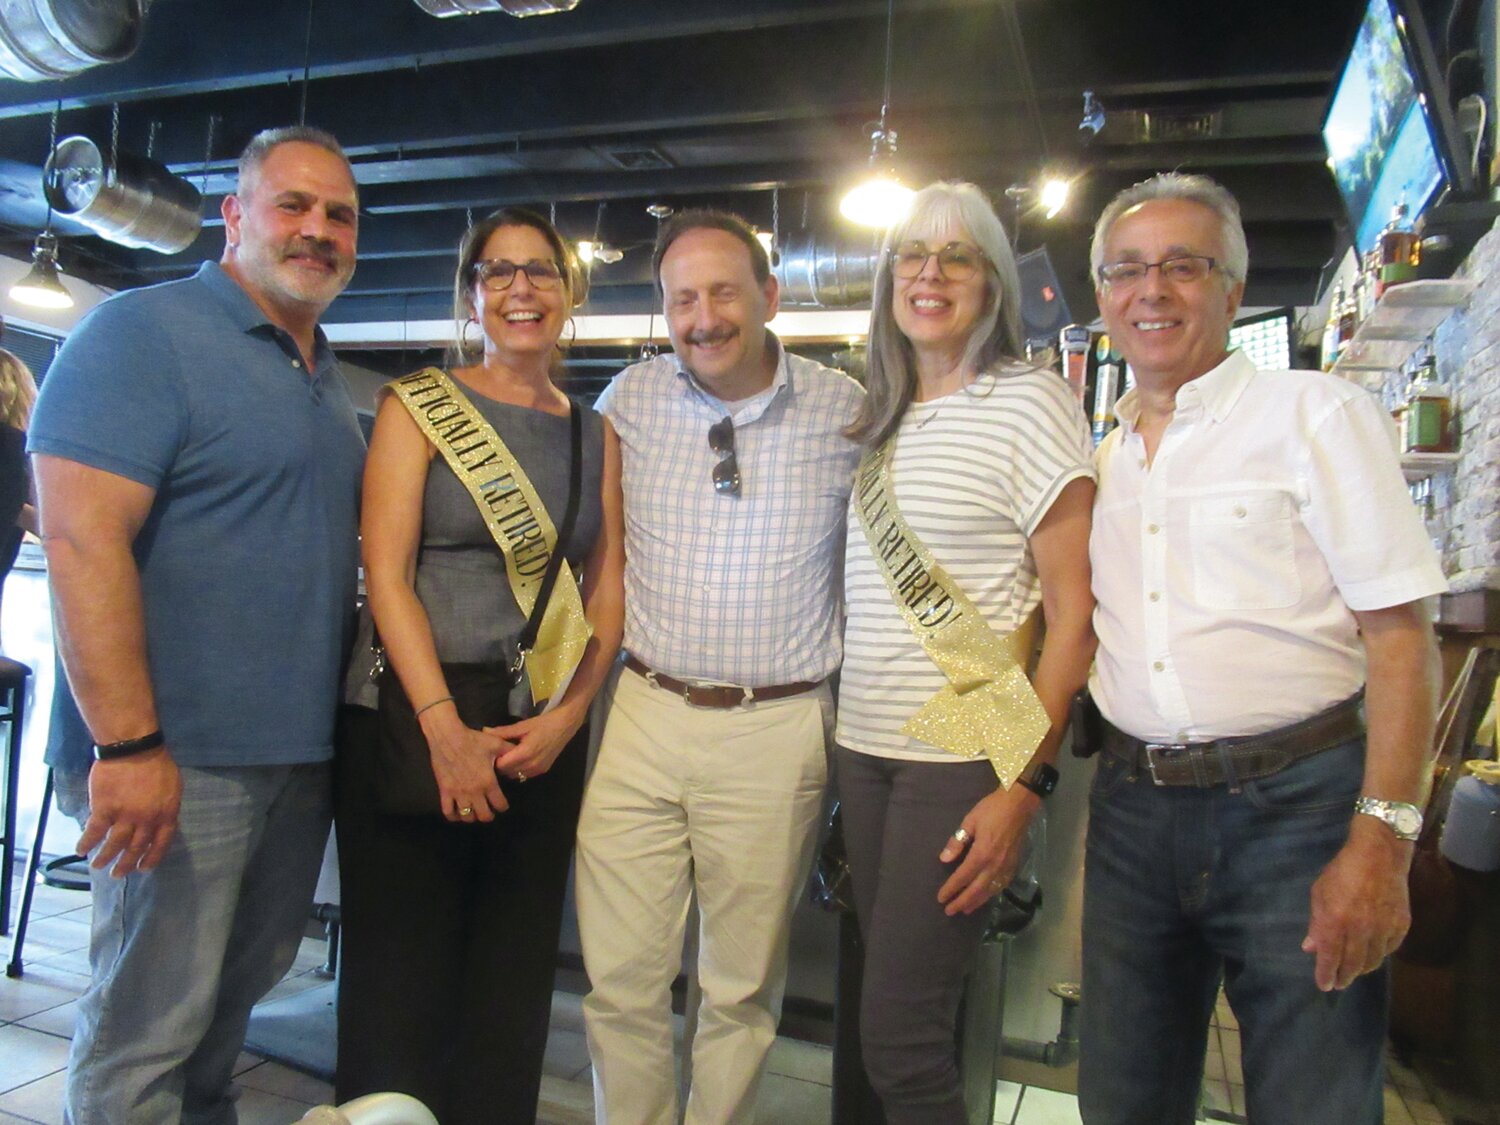 SPECIAL SENDOFF: Julie-anne Zarrella and Brenda Lee Troia are all smiles and joined by Johnston School Committee Vice Chairman Joe Rotella, Superintendent of Schools Dr. Bernard DiLullo Jr. and School Committee Chairman Bob LaFazia during last Wednesday’s retirement party.